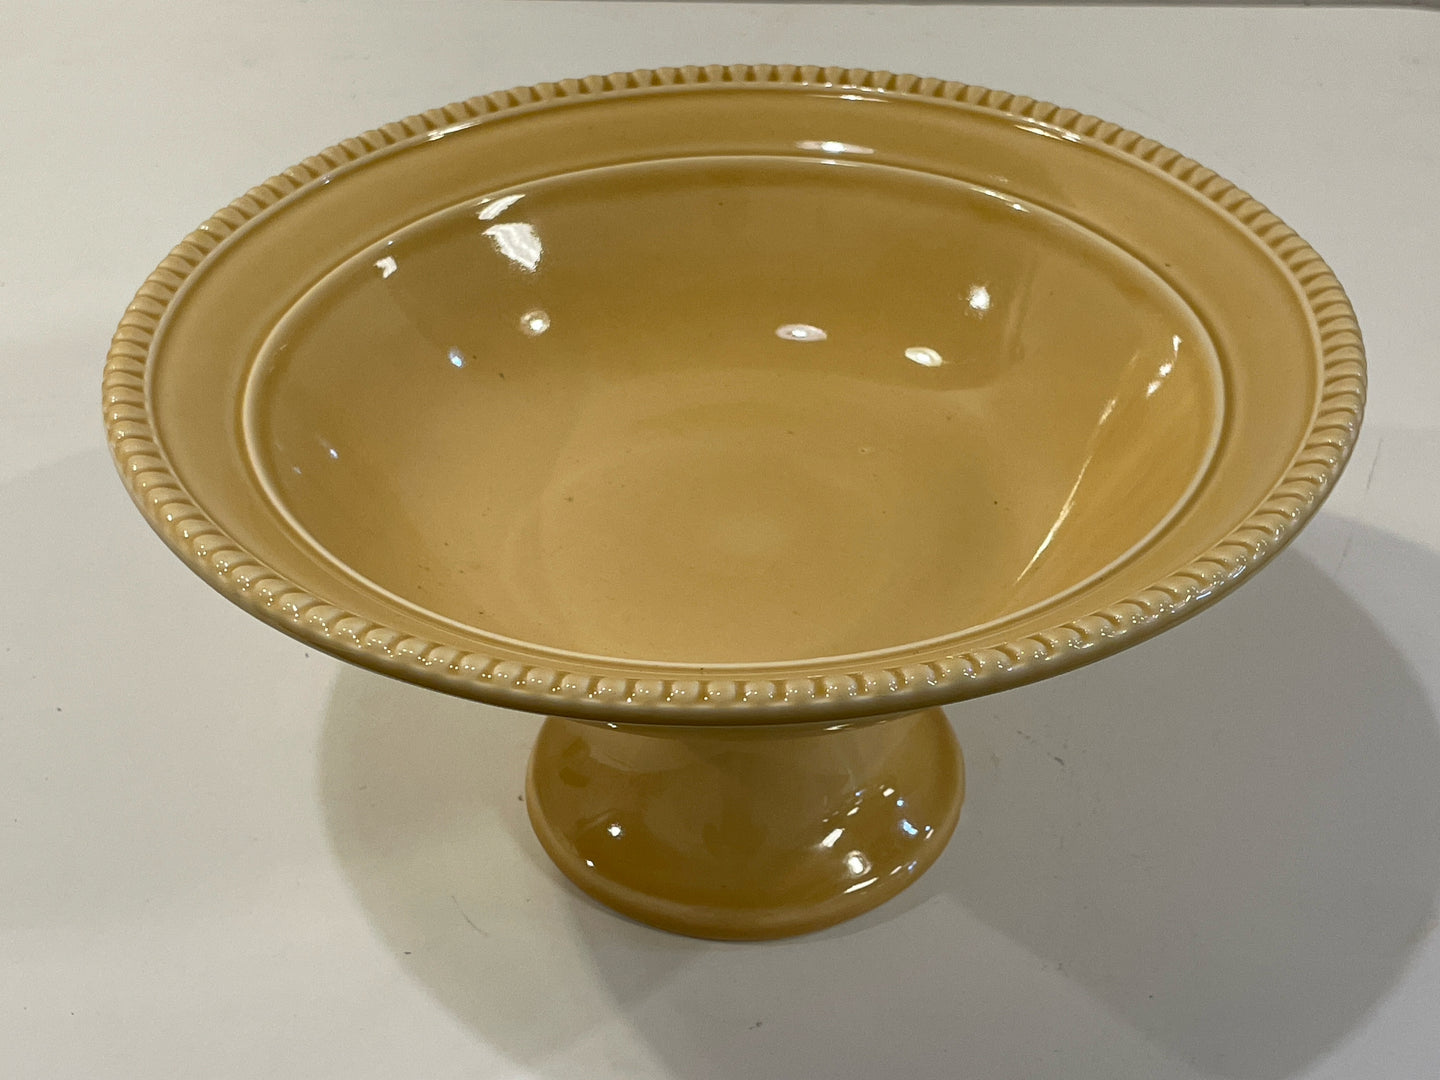 Yellow Footed Serving Bowl made in Portugal